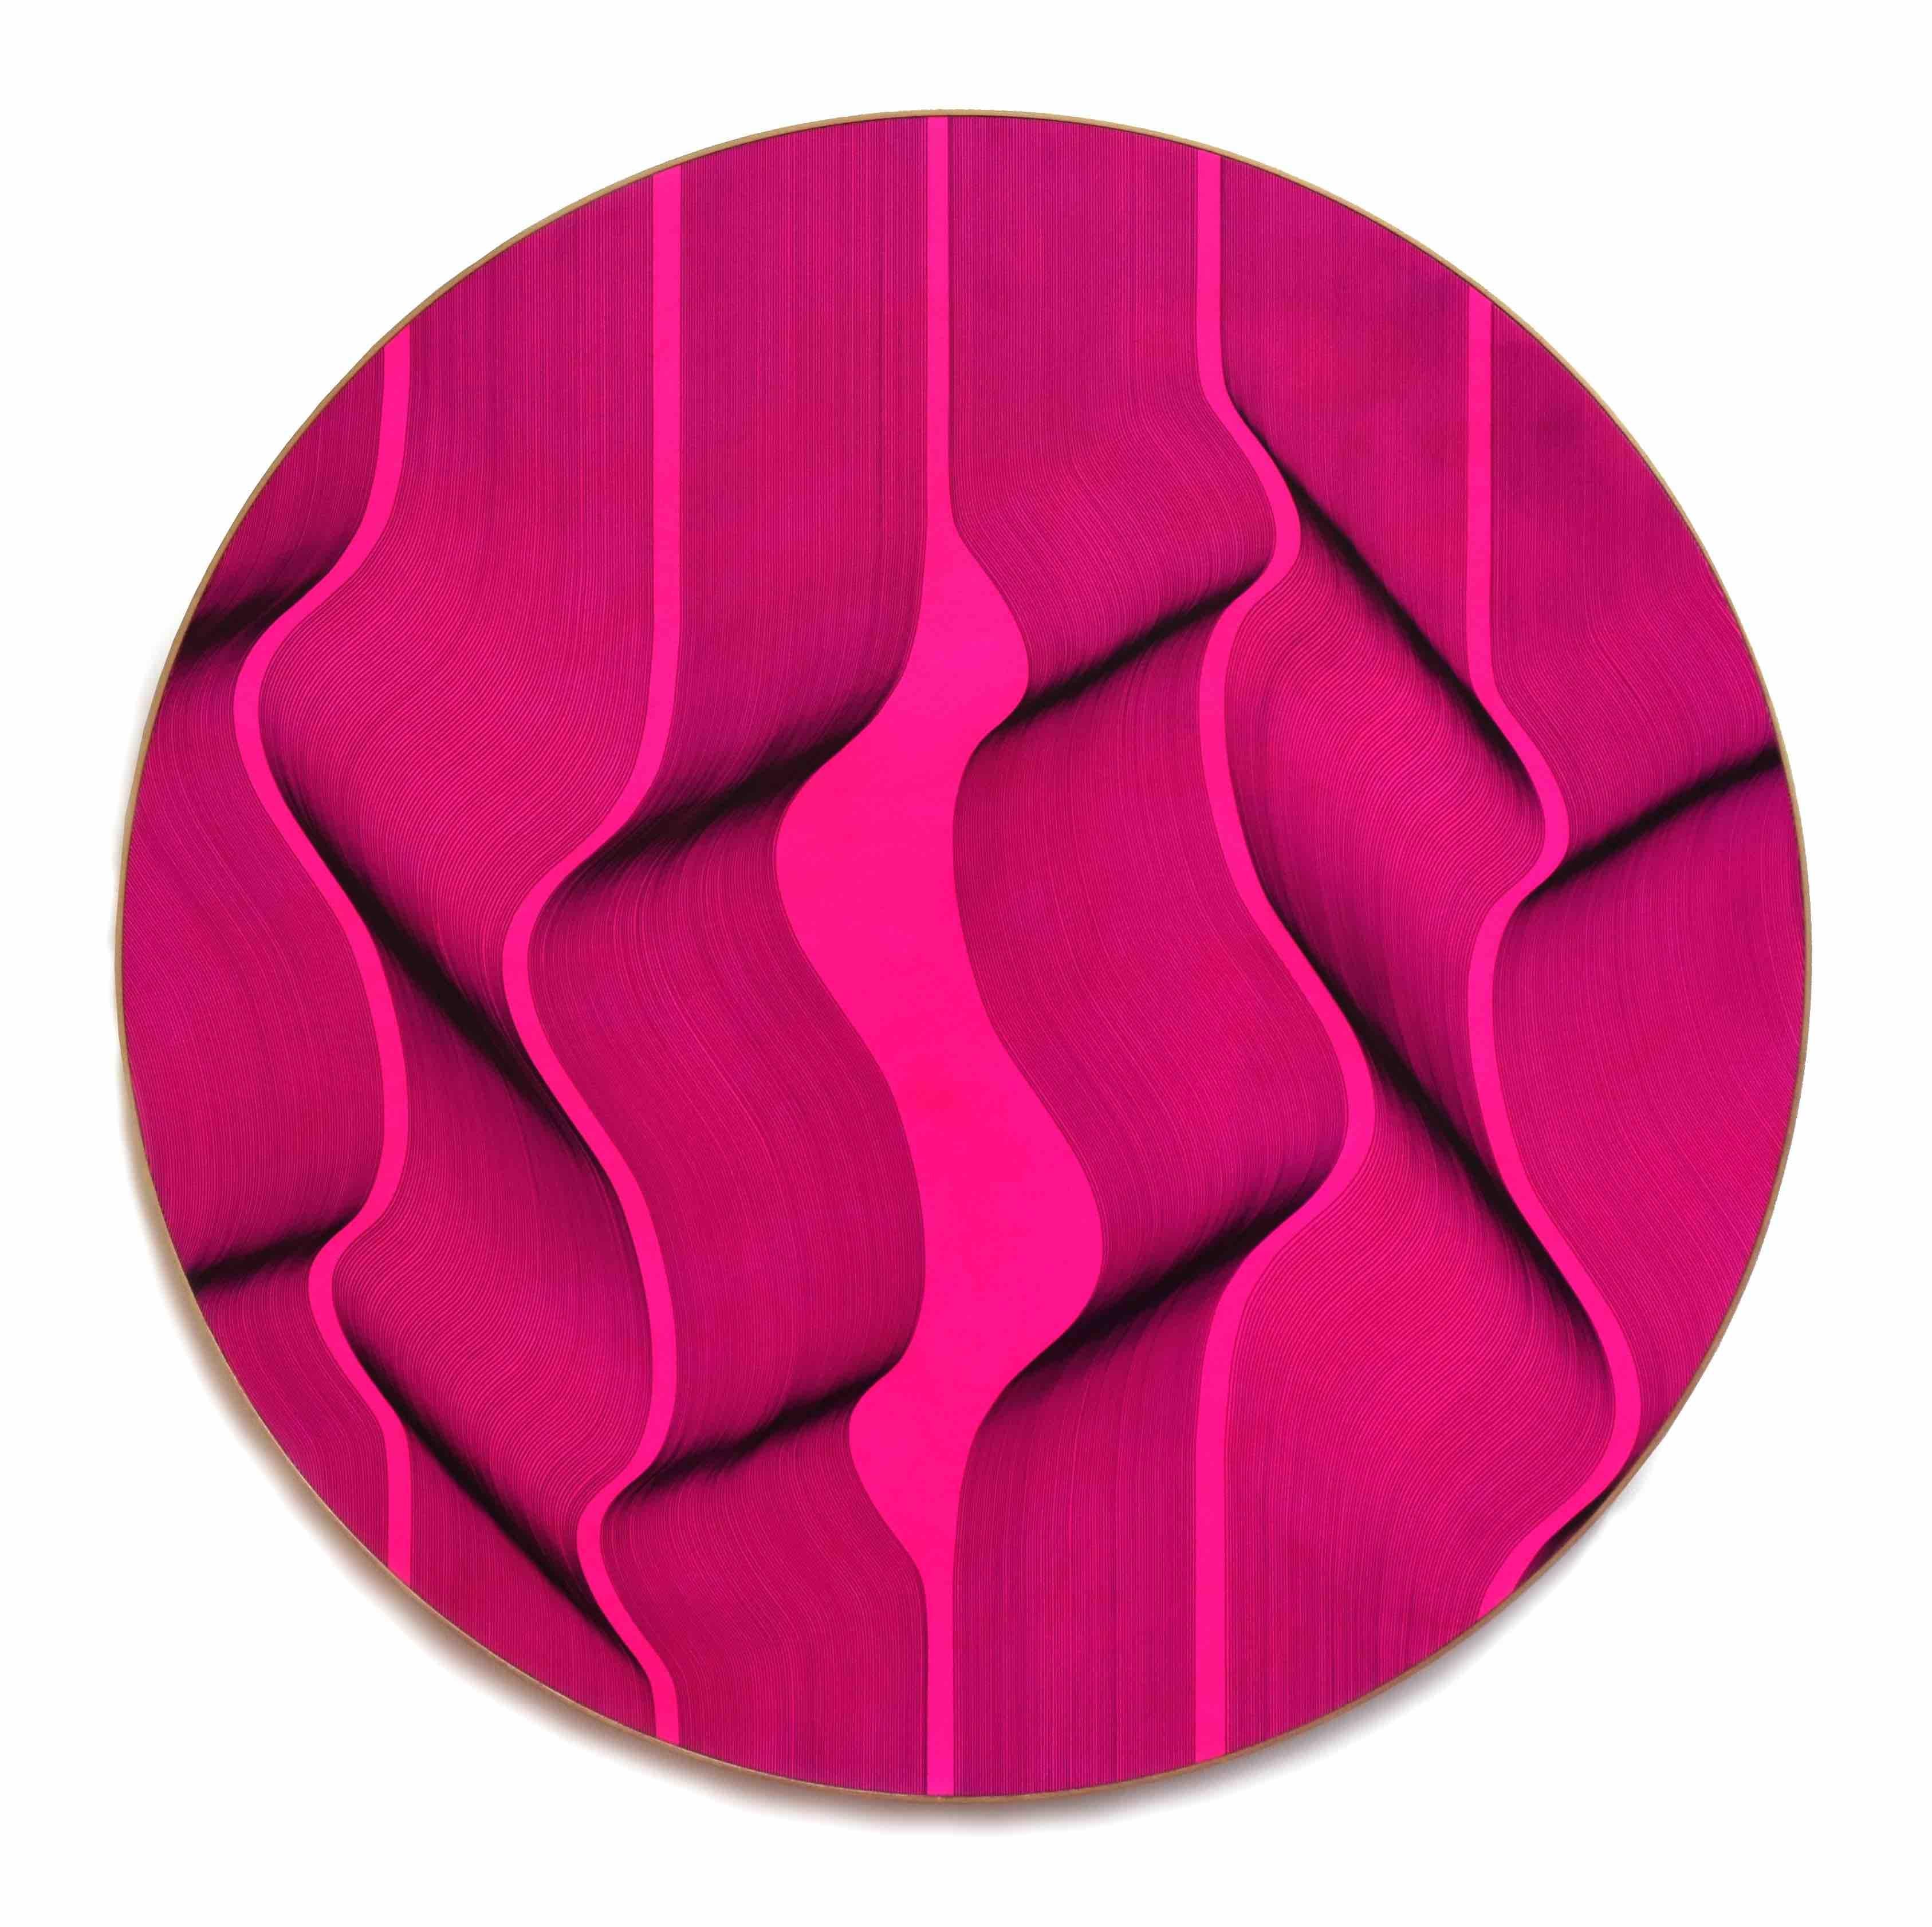 Fluo pink surface - geometric abstract painting - Painting by Roberto Lucchetta